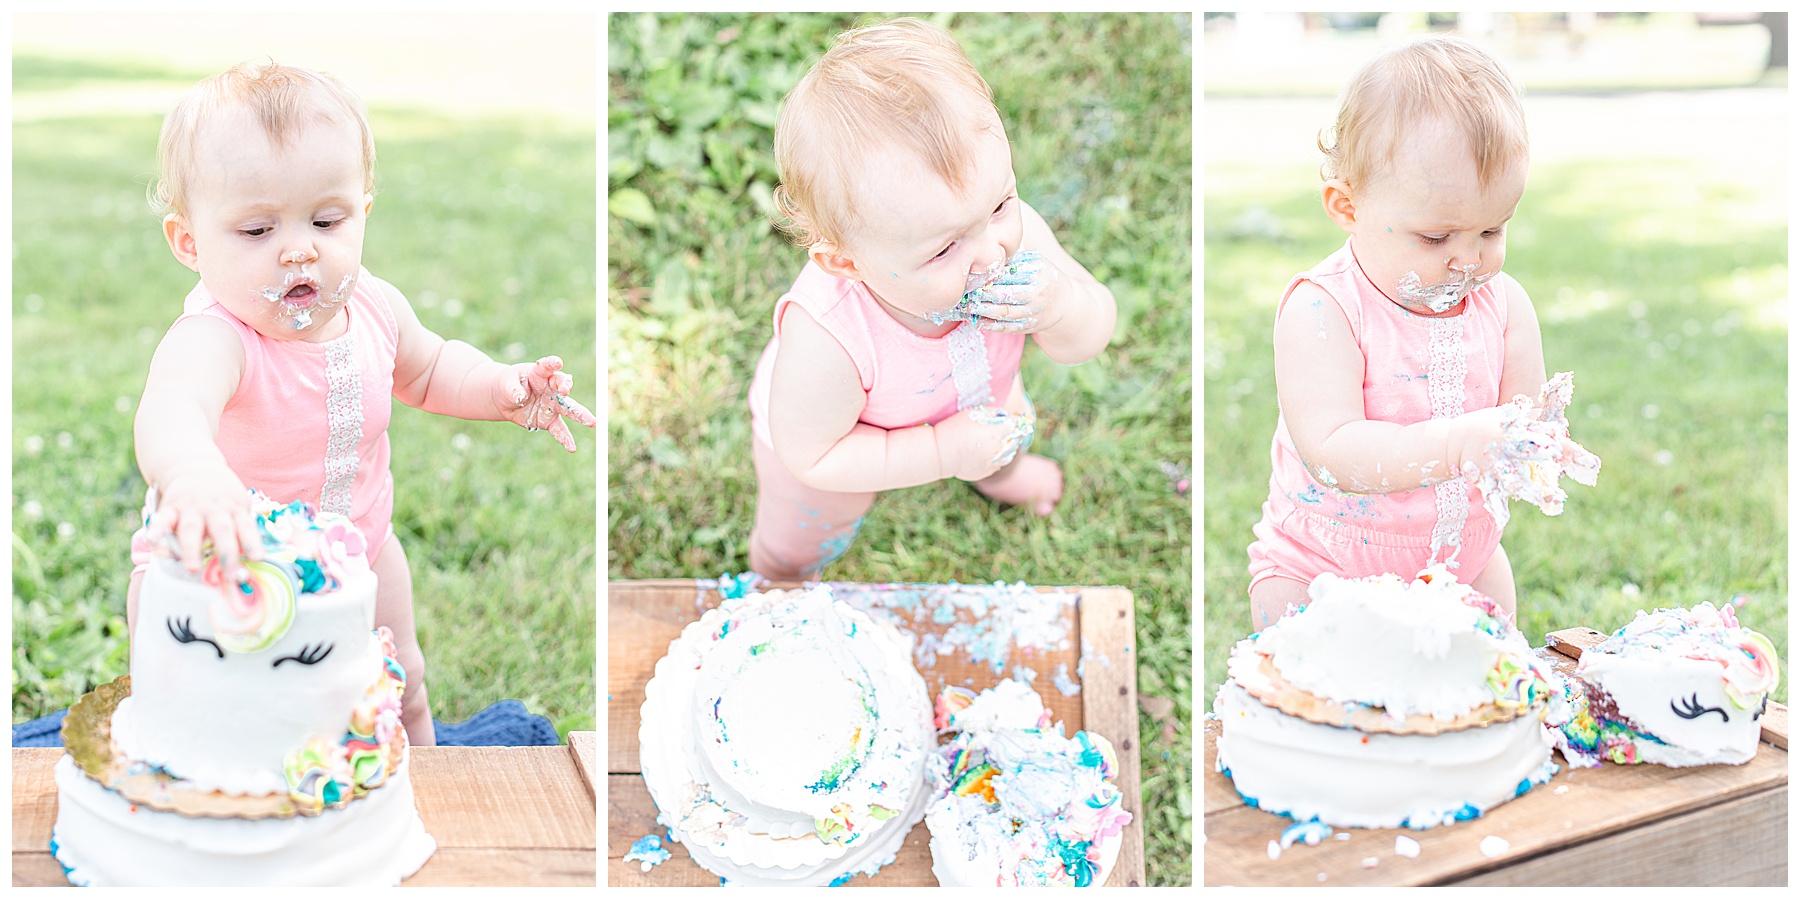 Cake Smash One Year Old Photography Session Wisconsin